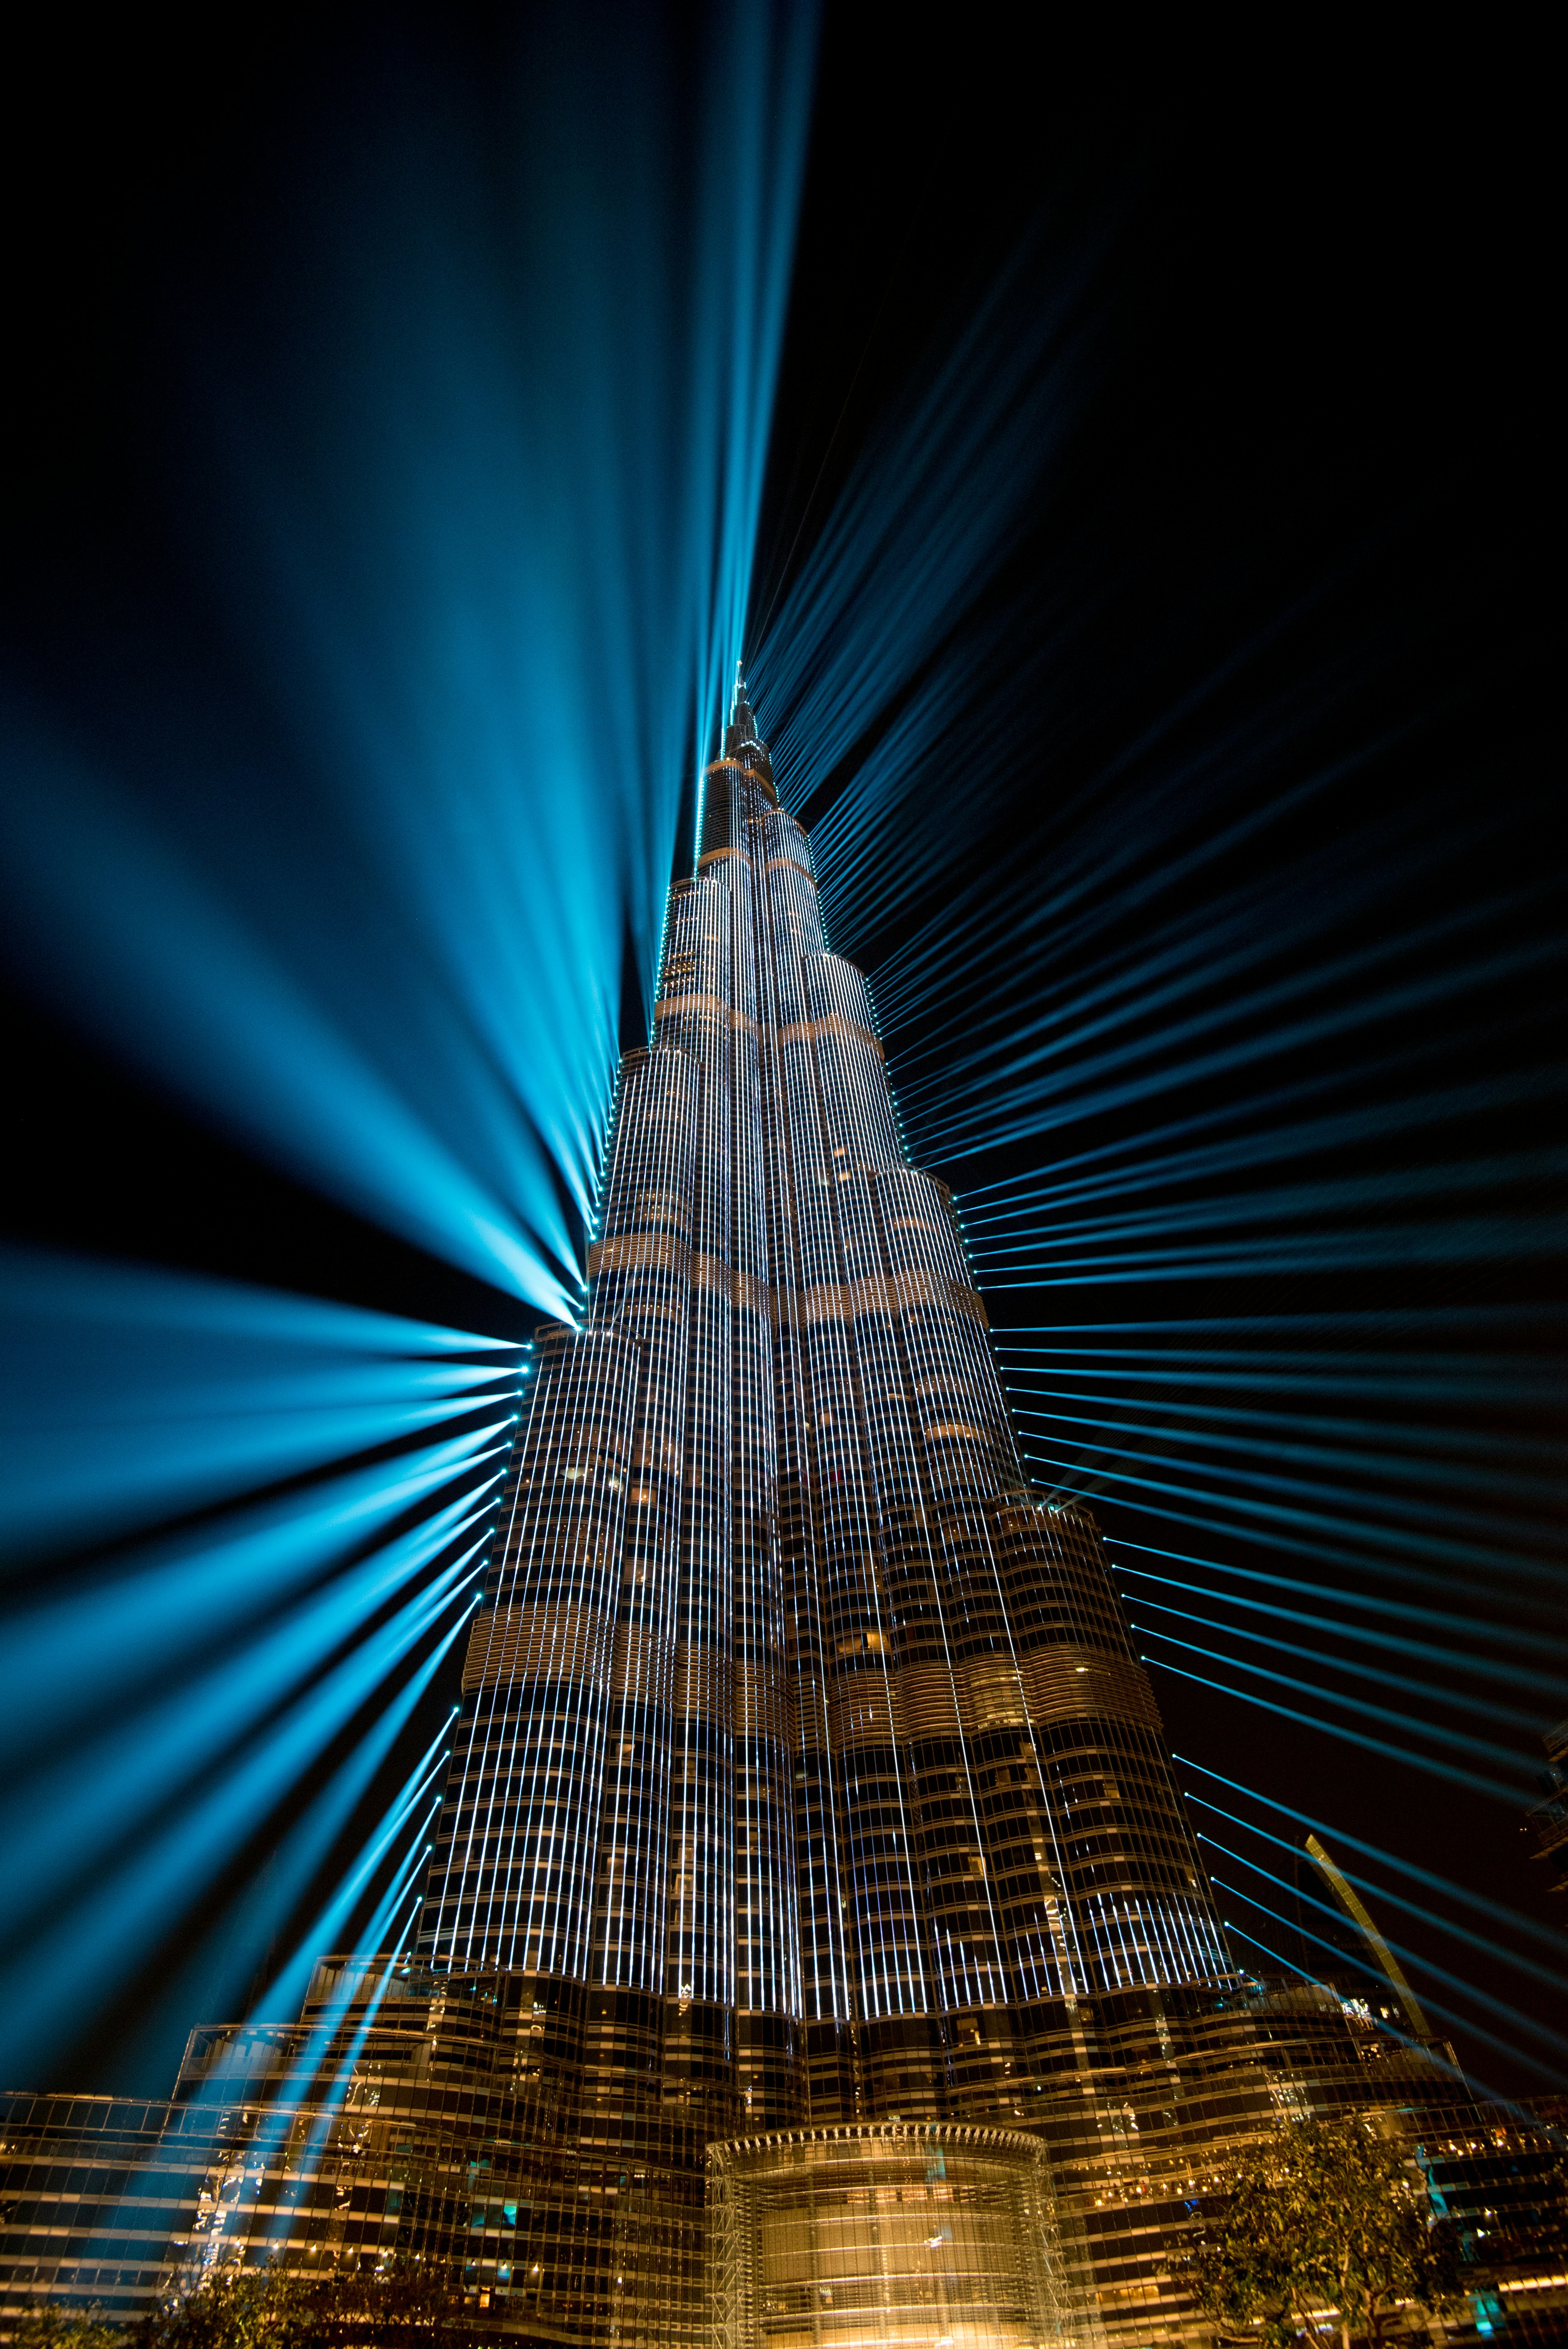 The Burj Khalifa is the tallest tower in the world. \r
\r
What an impressive building!